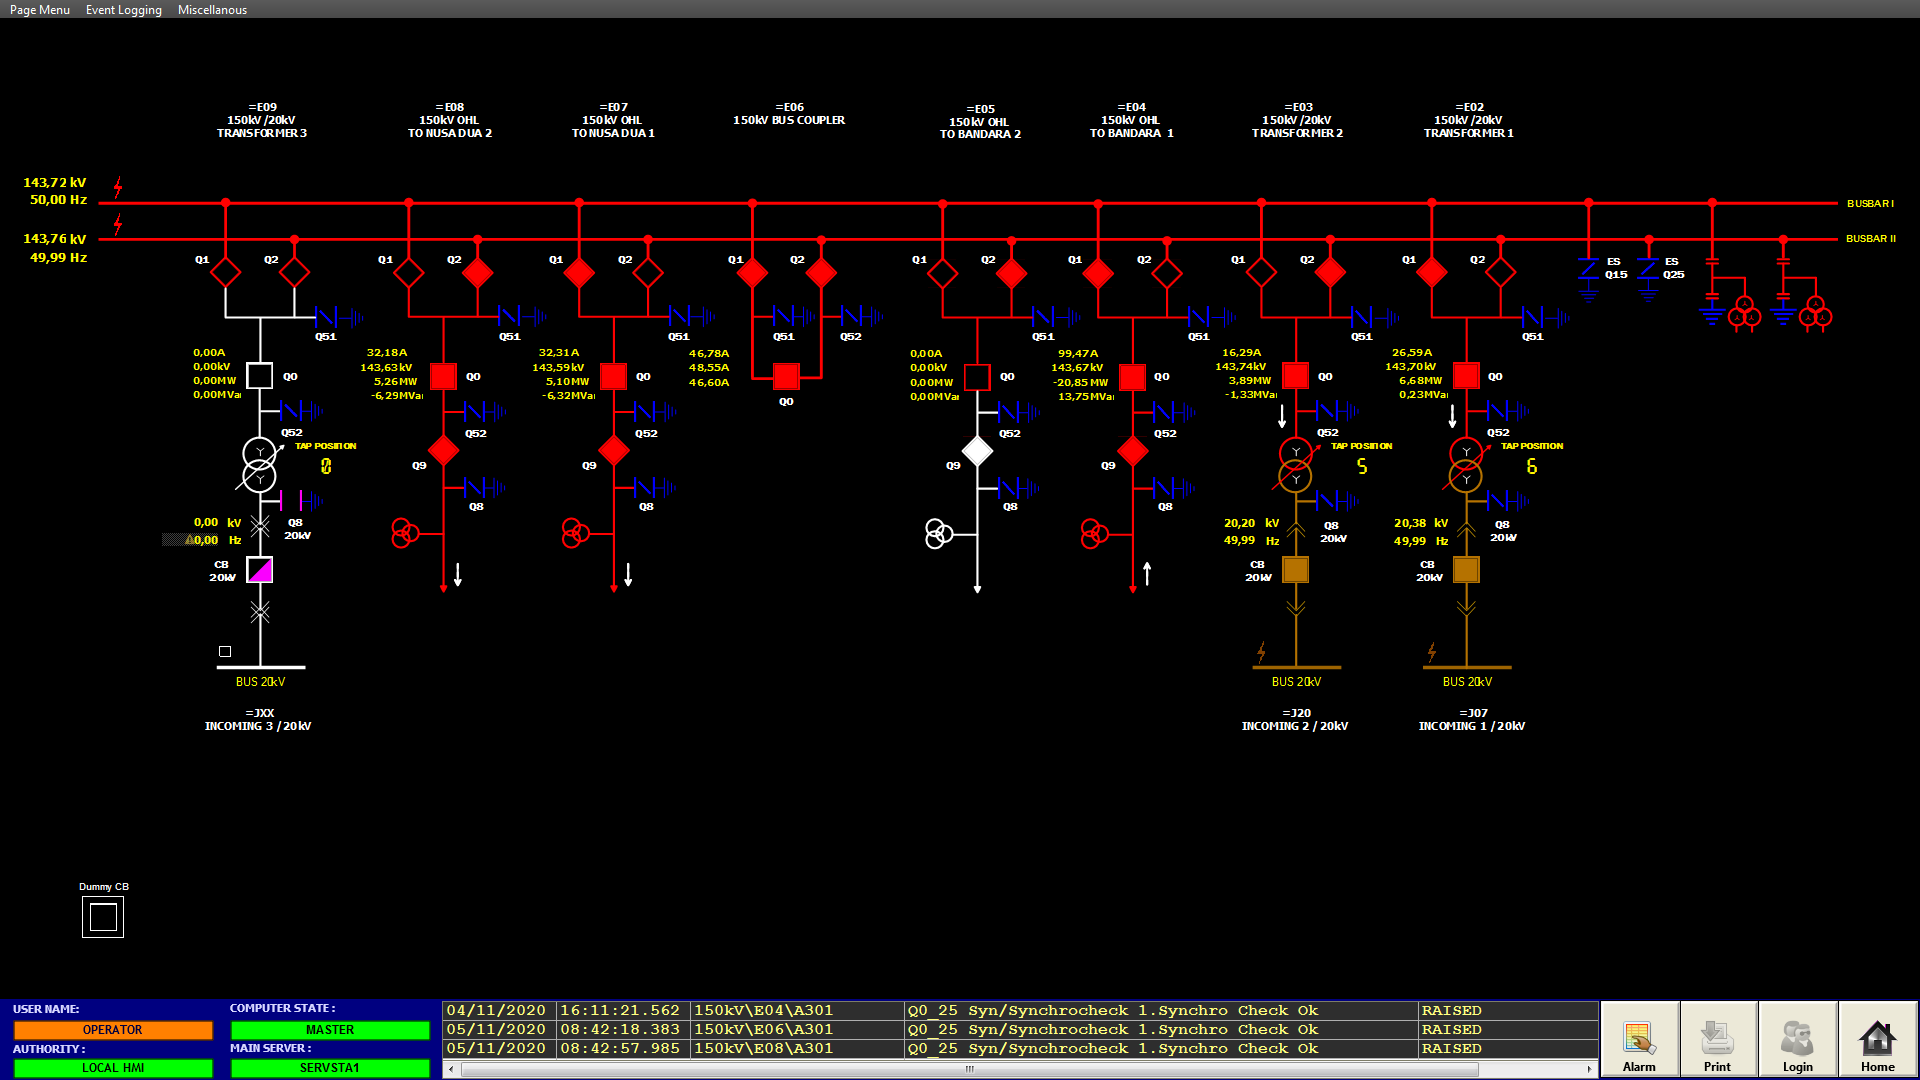 SCADA means Supervisory Control and Data Acquisition